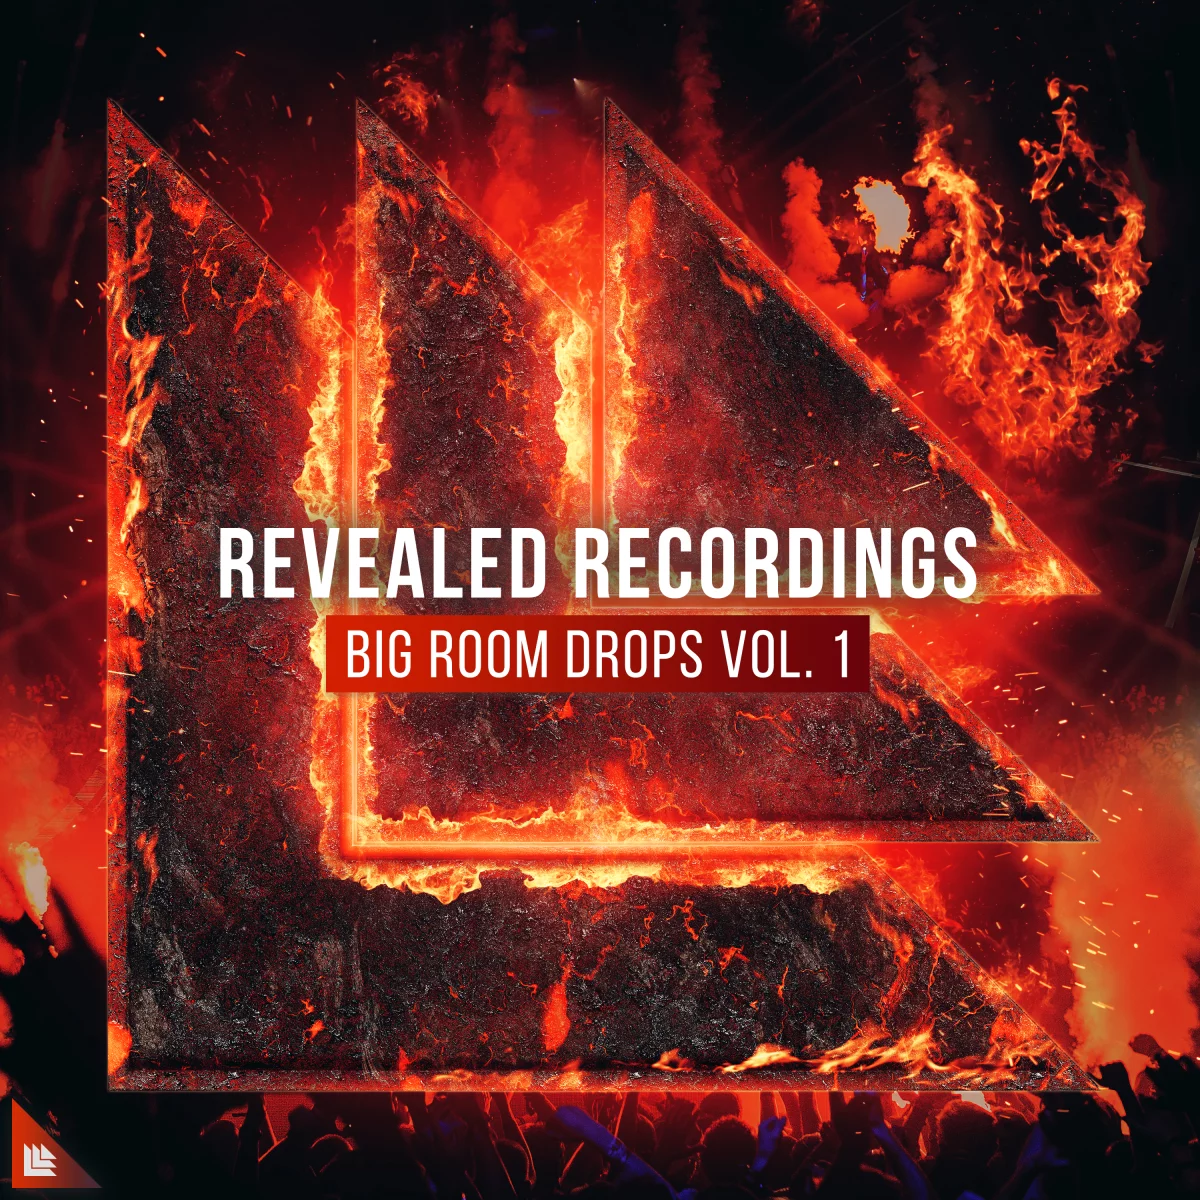 Revealed Recordings presents The Best of Big Room Vol. 1 - Revealed Recordings